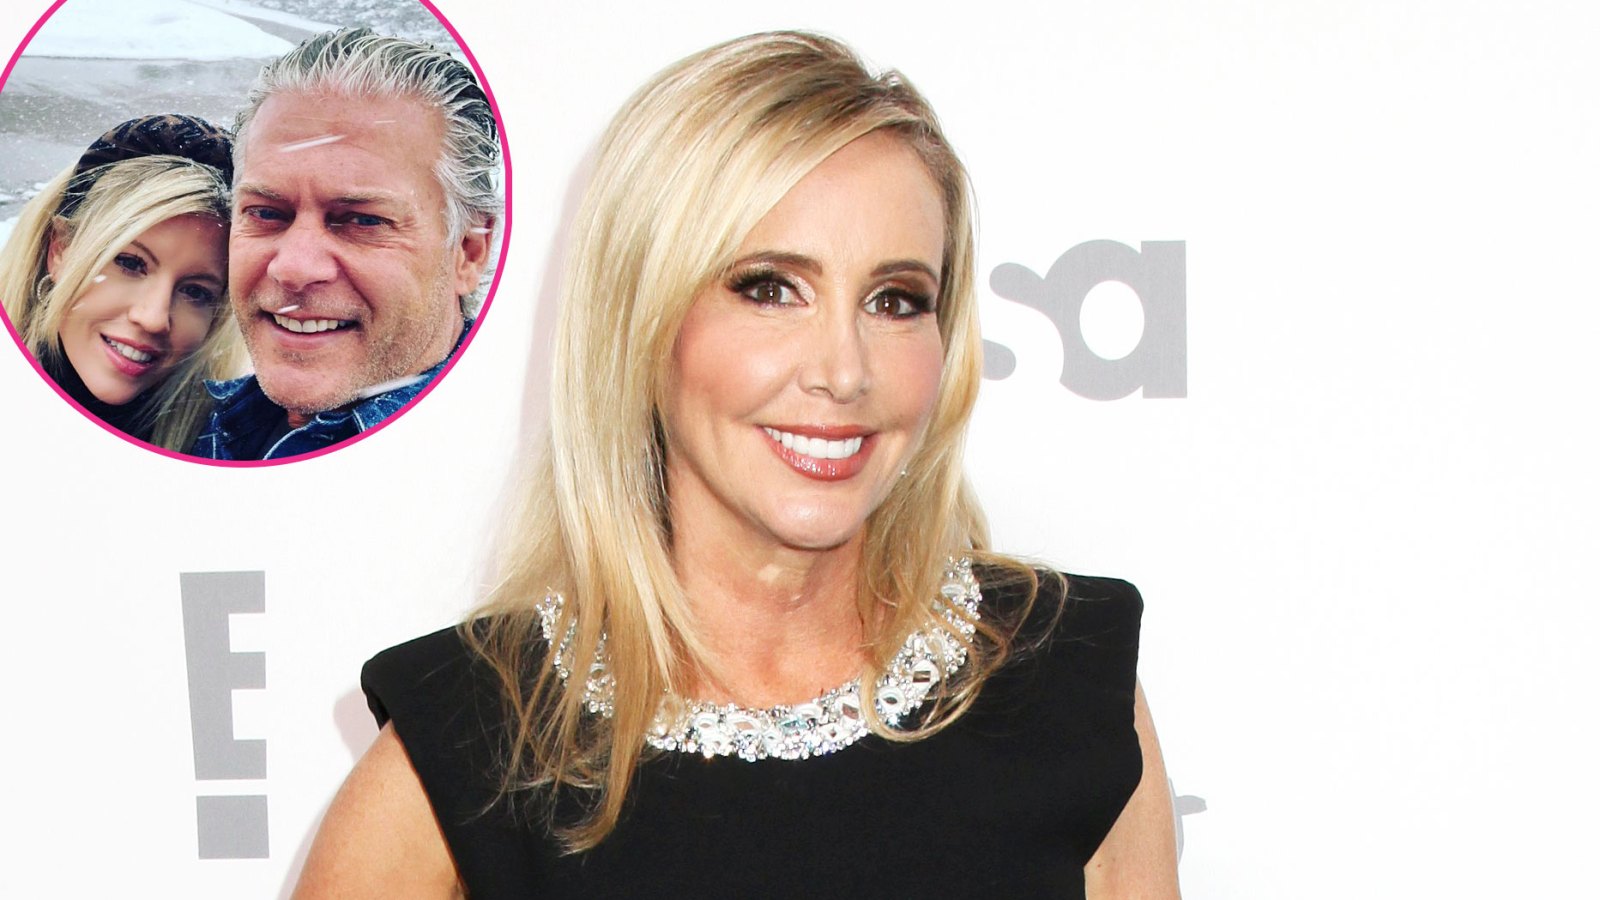 Shannon Beador Reveals She Sent Ex-Husband David Beador a Baby Gift After Welcoming Child With Lesley Cook